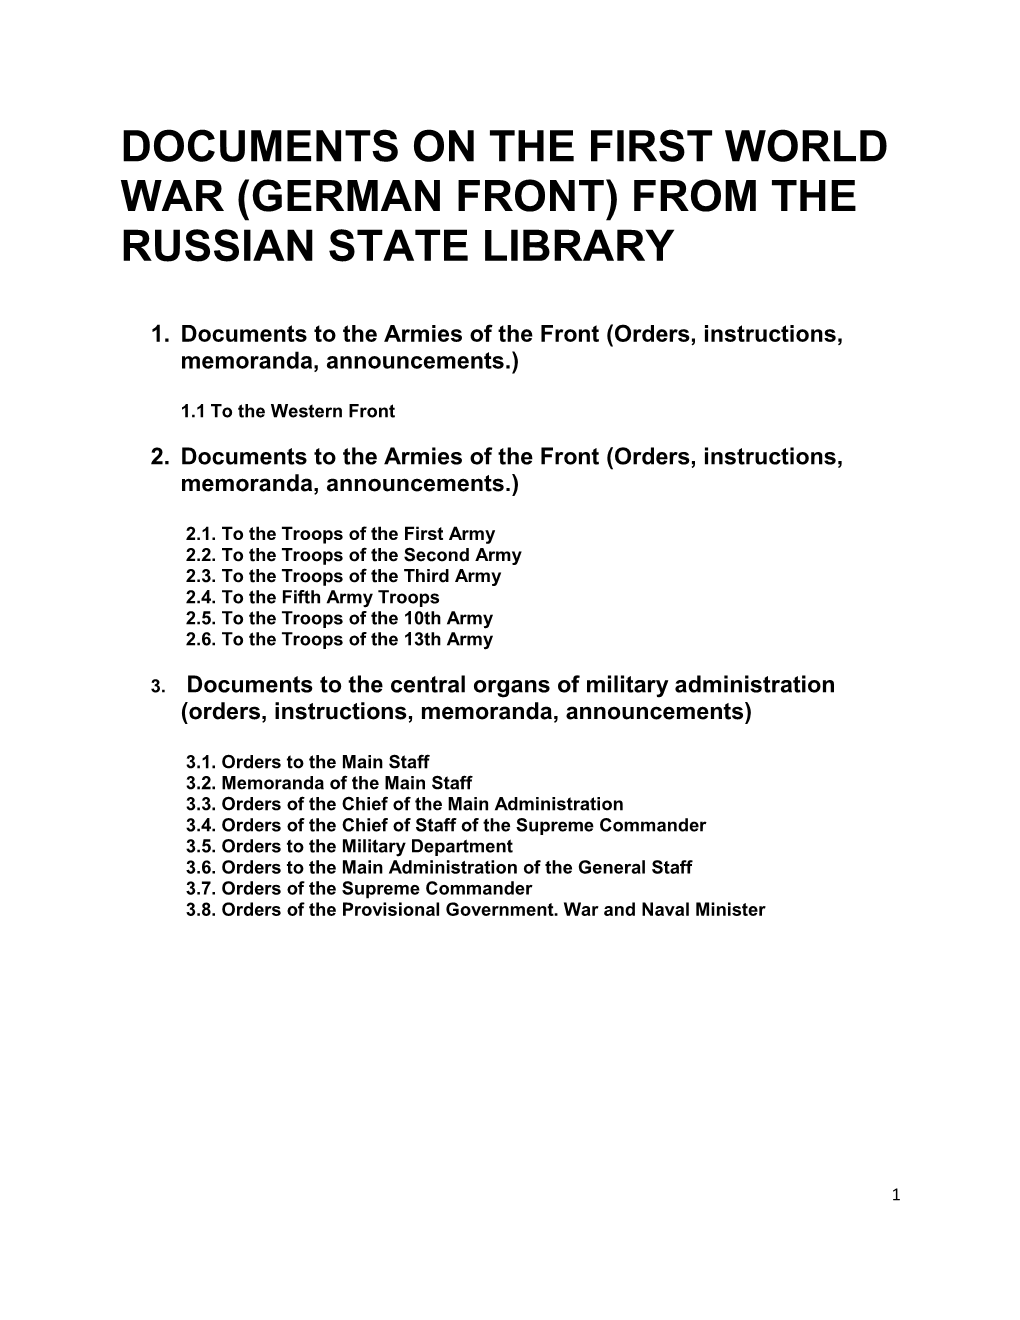 Documents on the First World War (German Front) from the Russian State Library